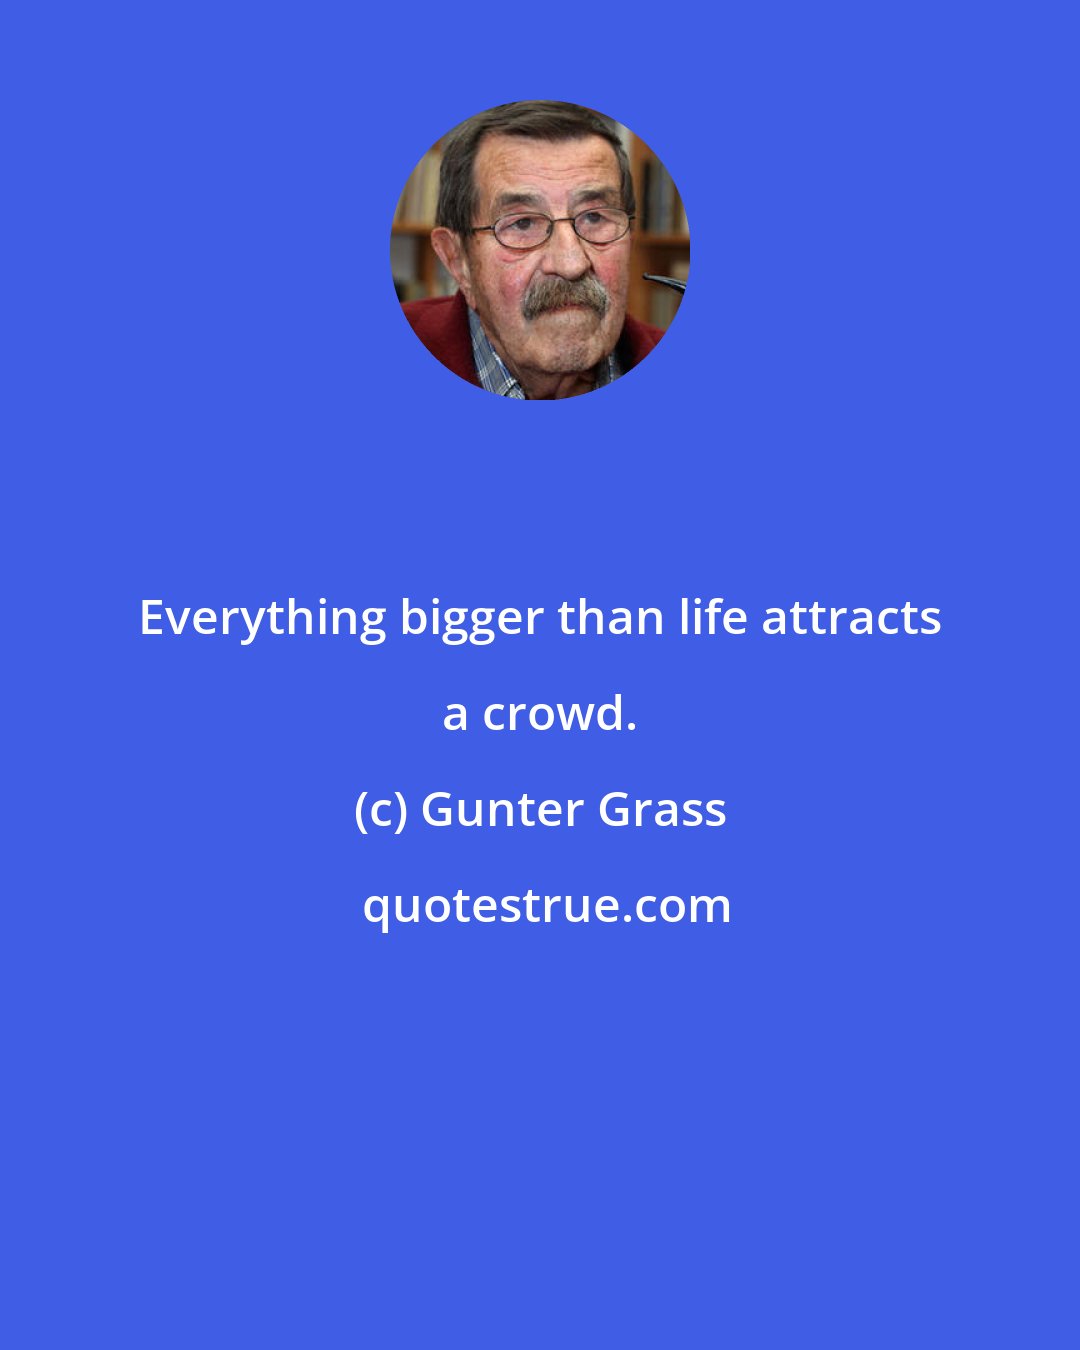 Gunter Grass: Everything bigger than life attracts a crowd.